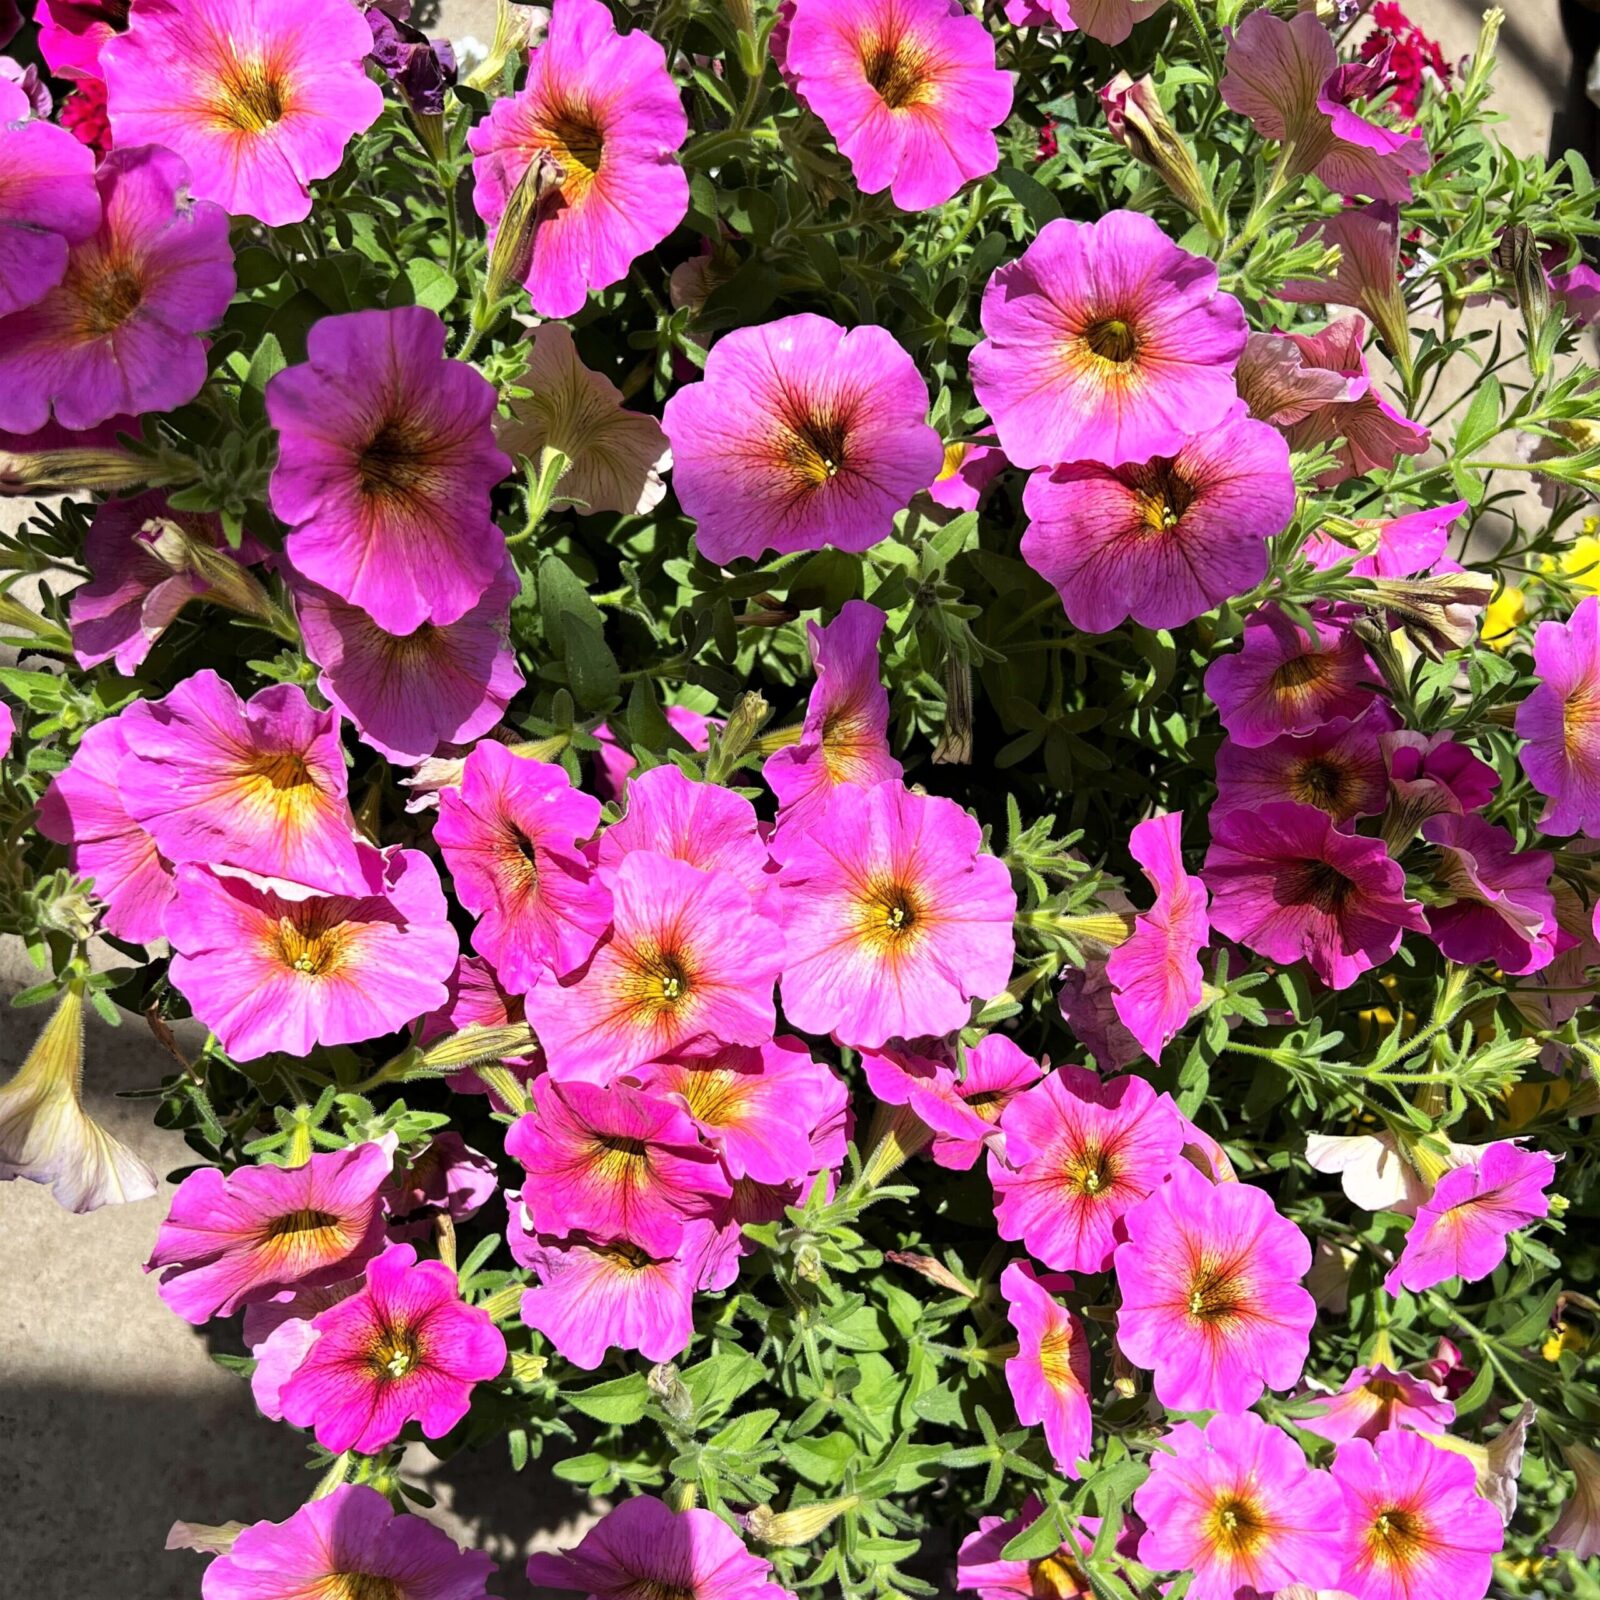 Greenstreet Growers Wholesale Landscape Supply Finished Production Plants Annual Petunia Pink